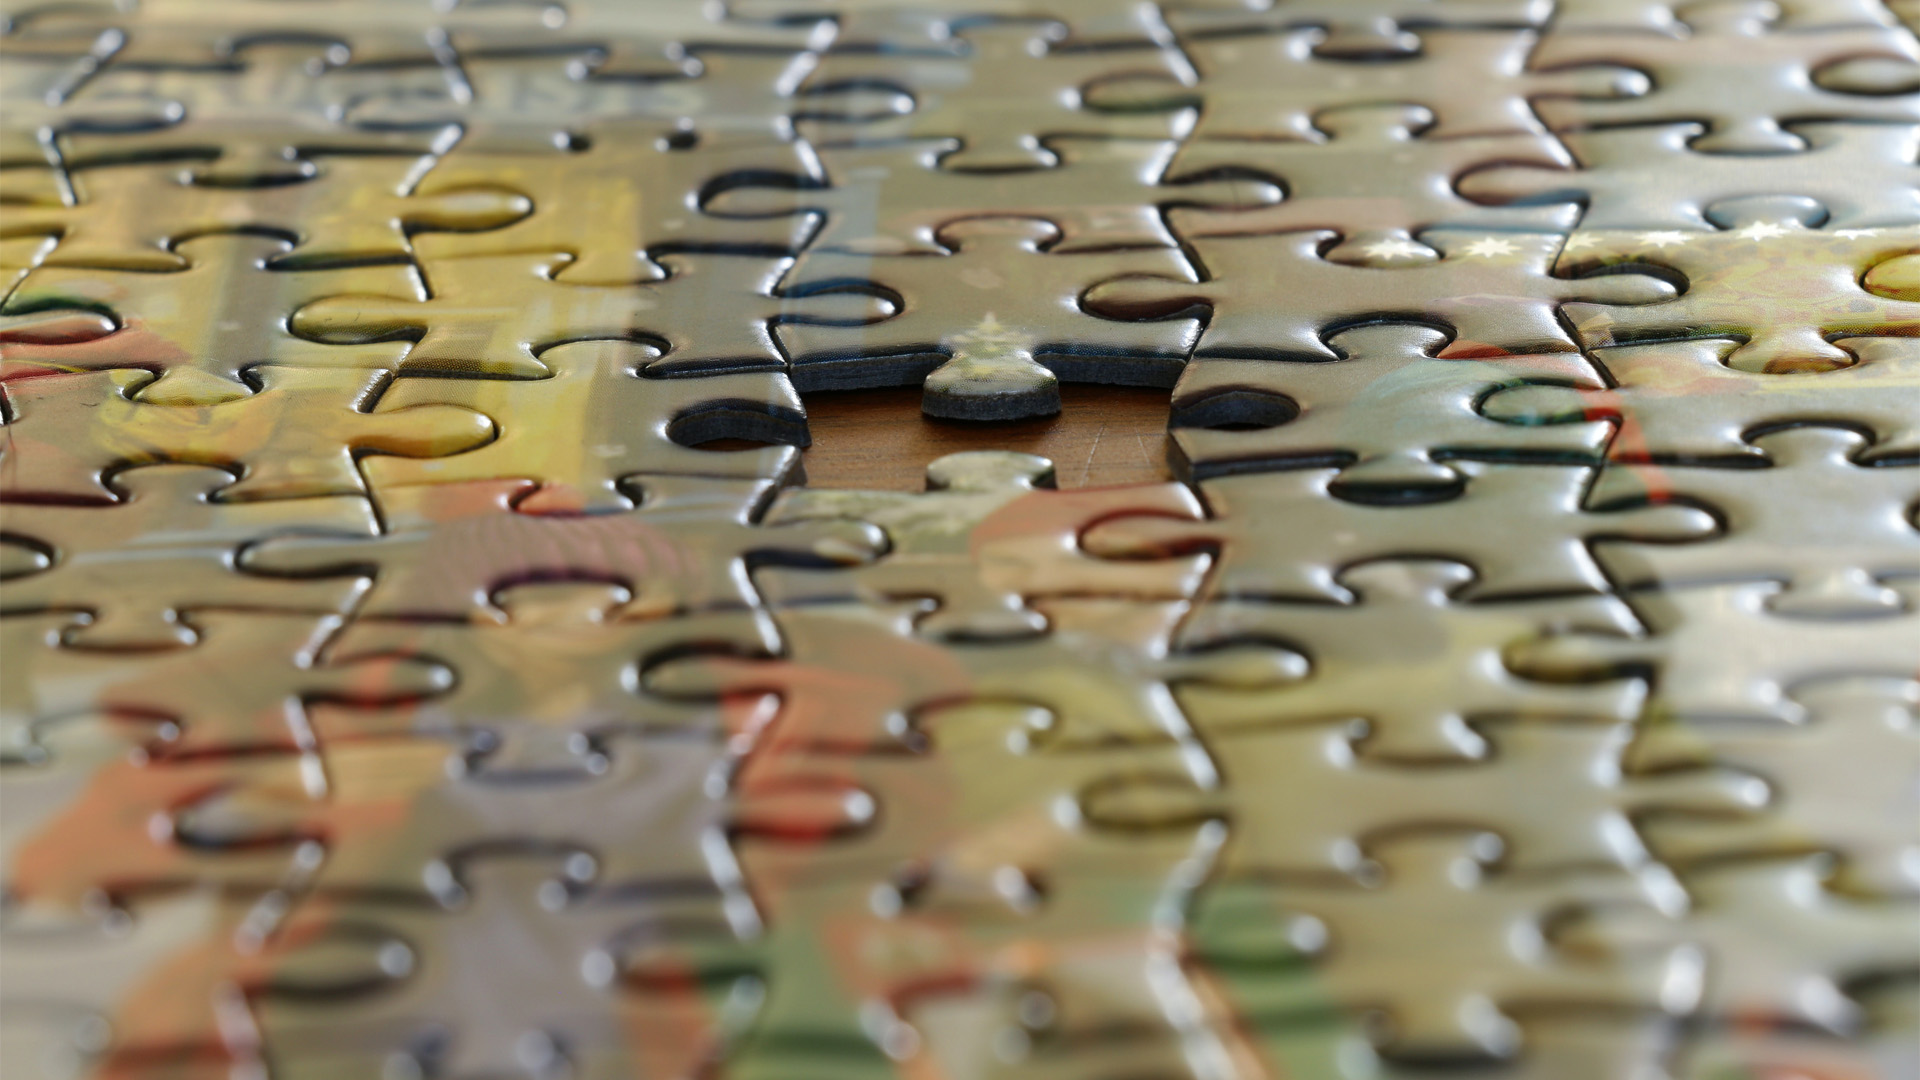 A macro photograph of a puzzle showing the missing piece